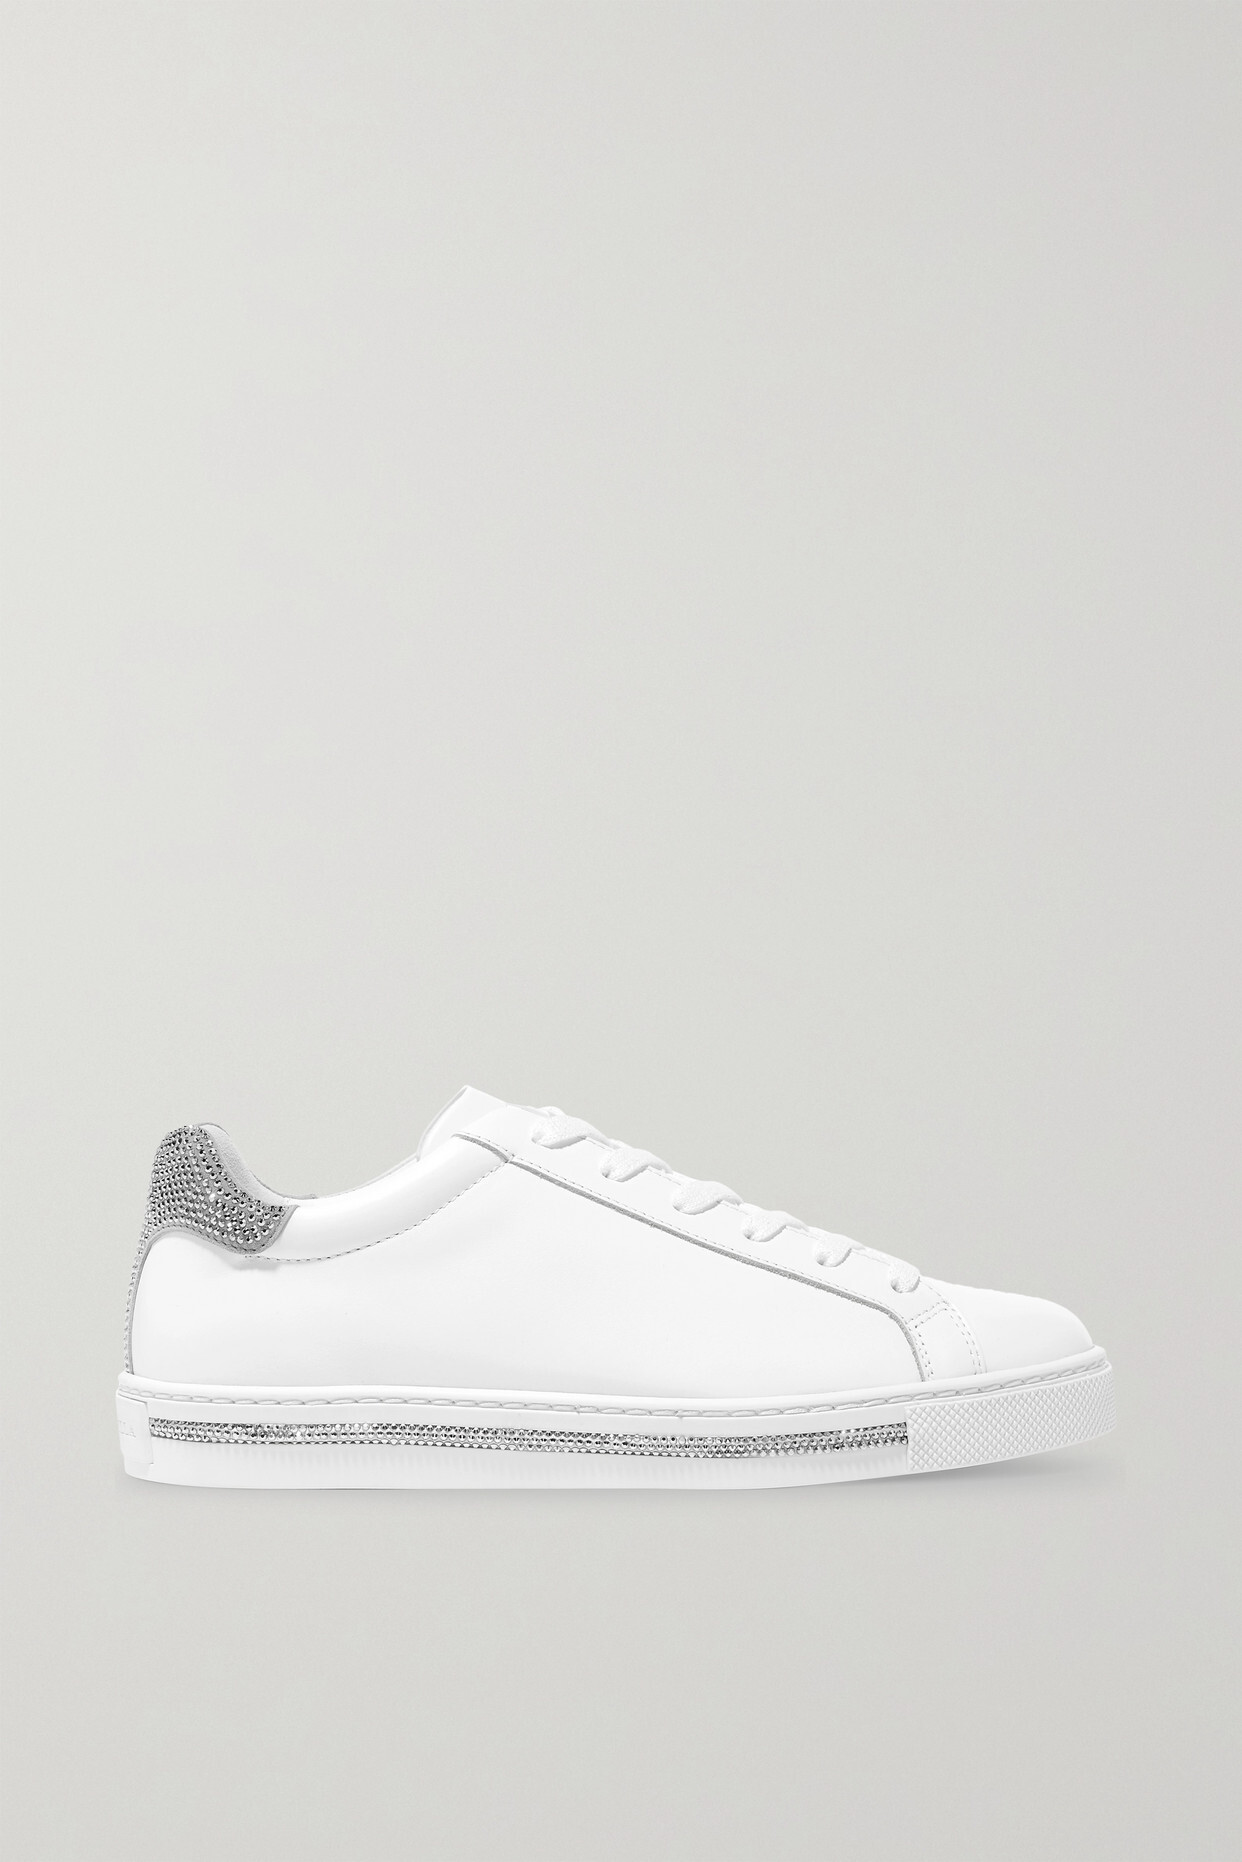 René Caovilla - Crystal-embellished Leather And Suede Sneakers - White